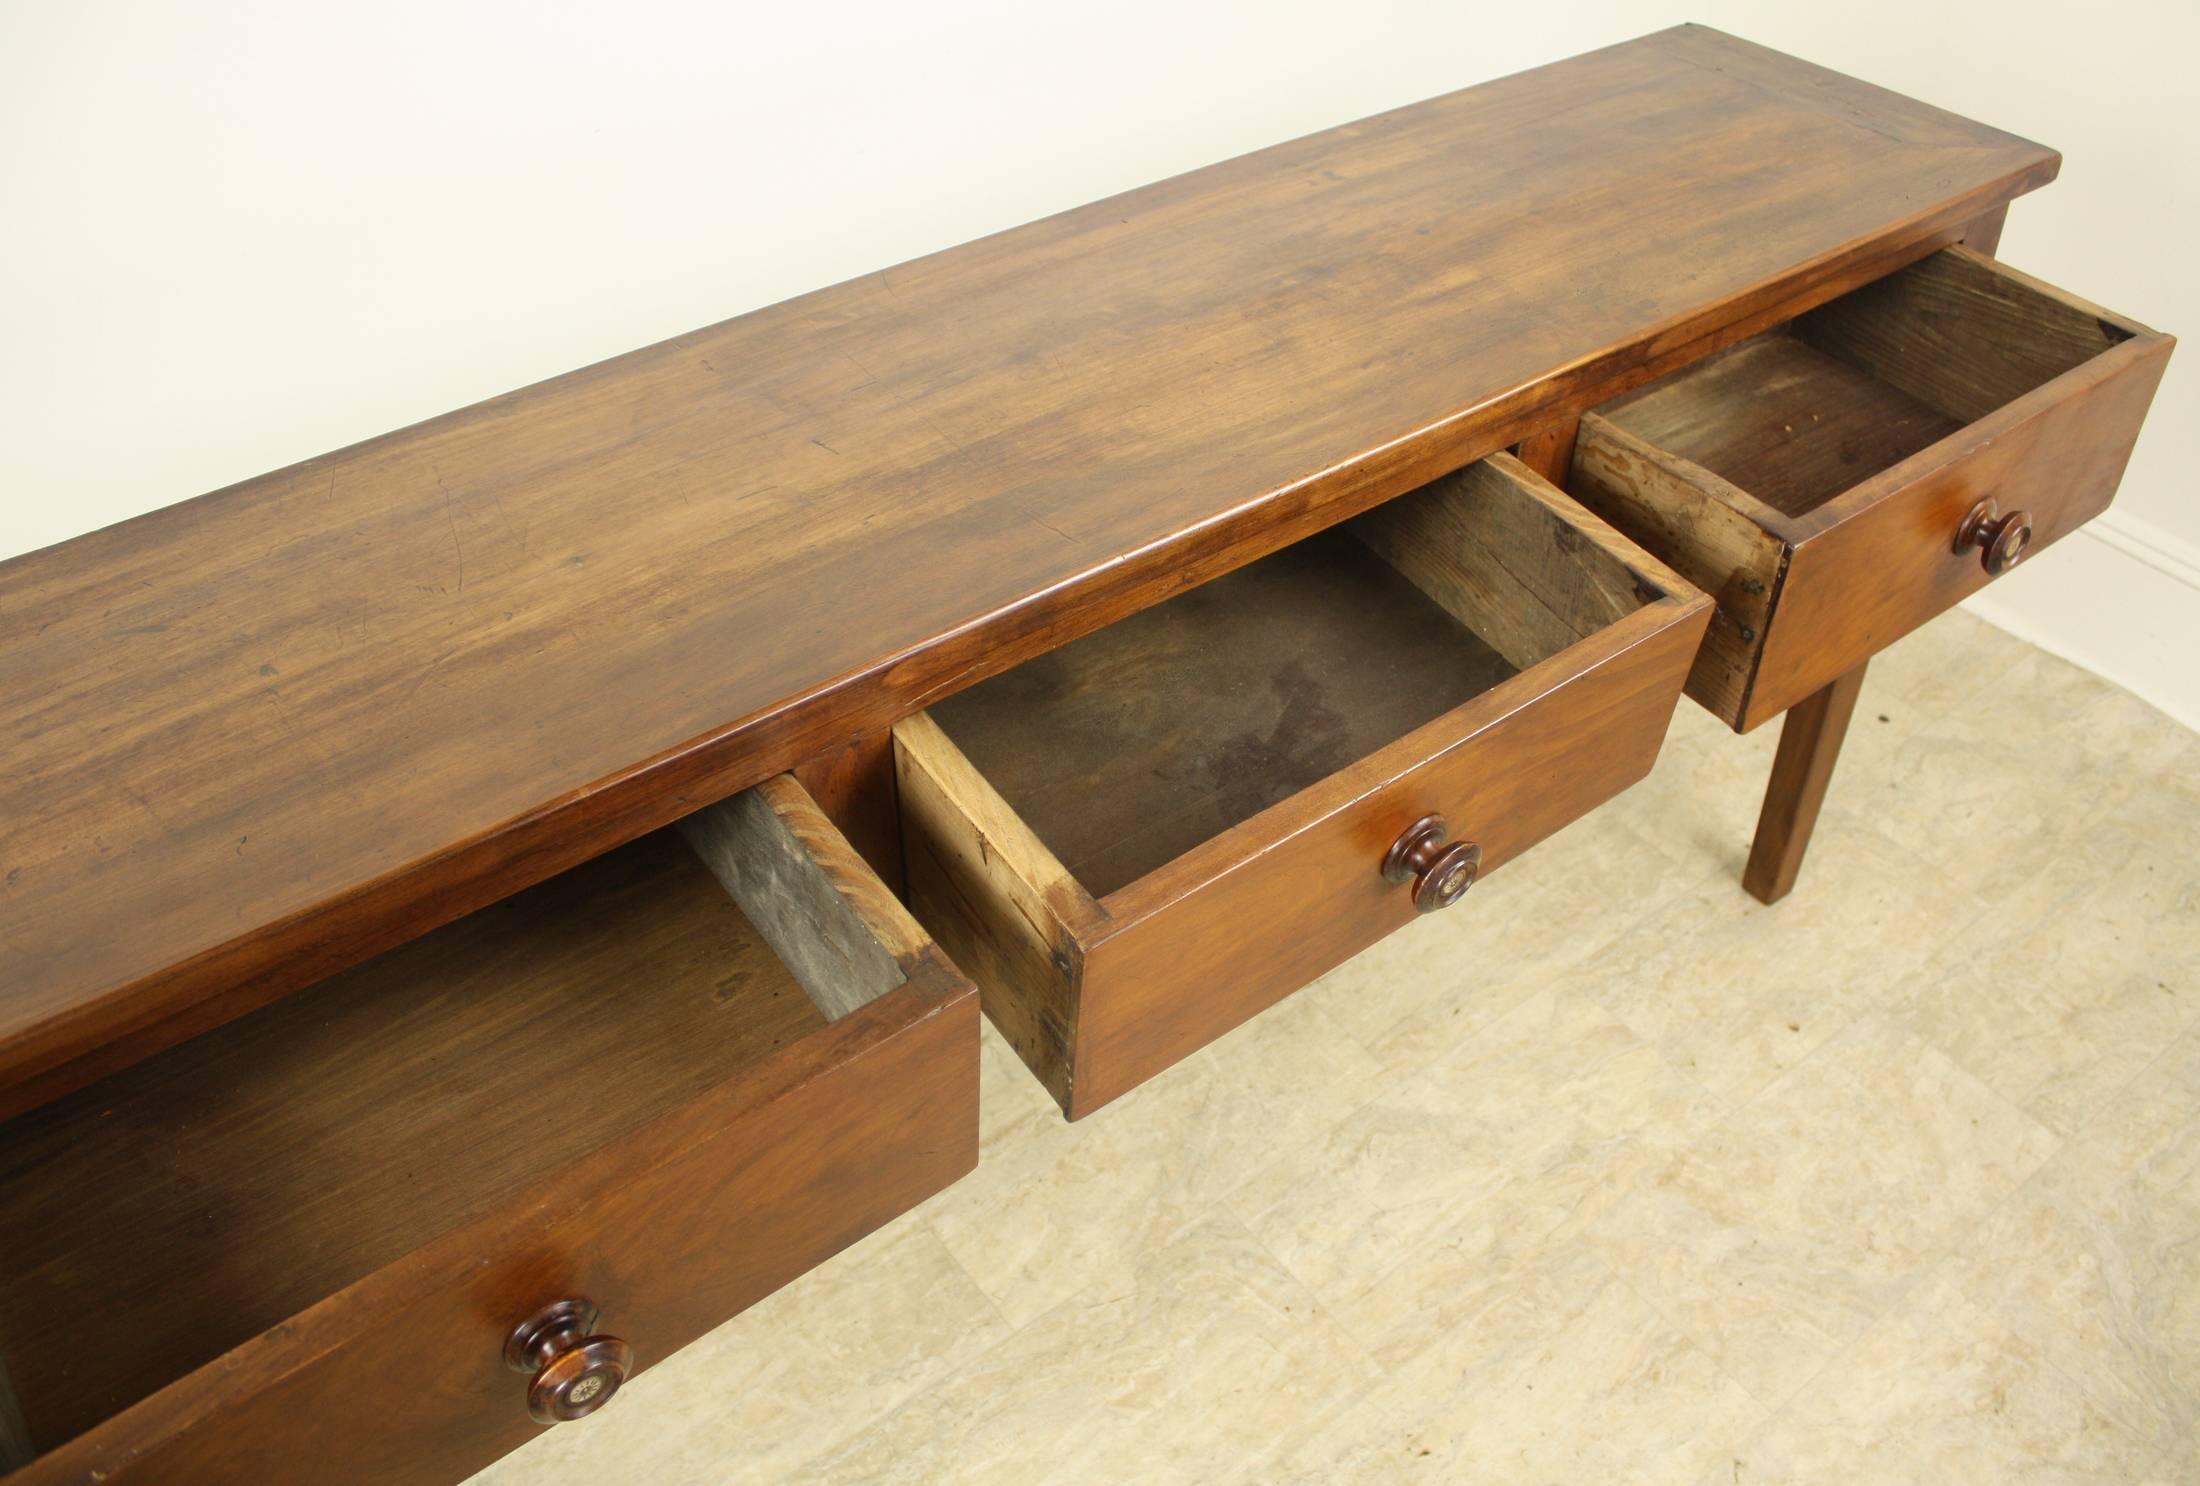 Contemporary Three-Drawer Cherry Server Fashioned of Old Wood